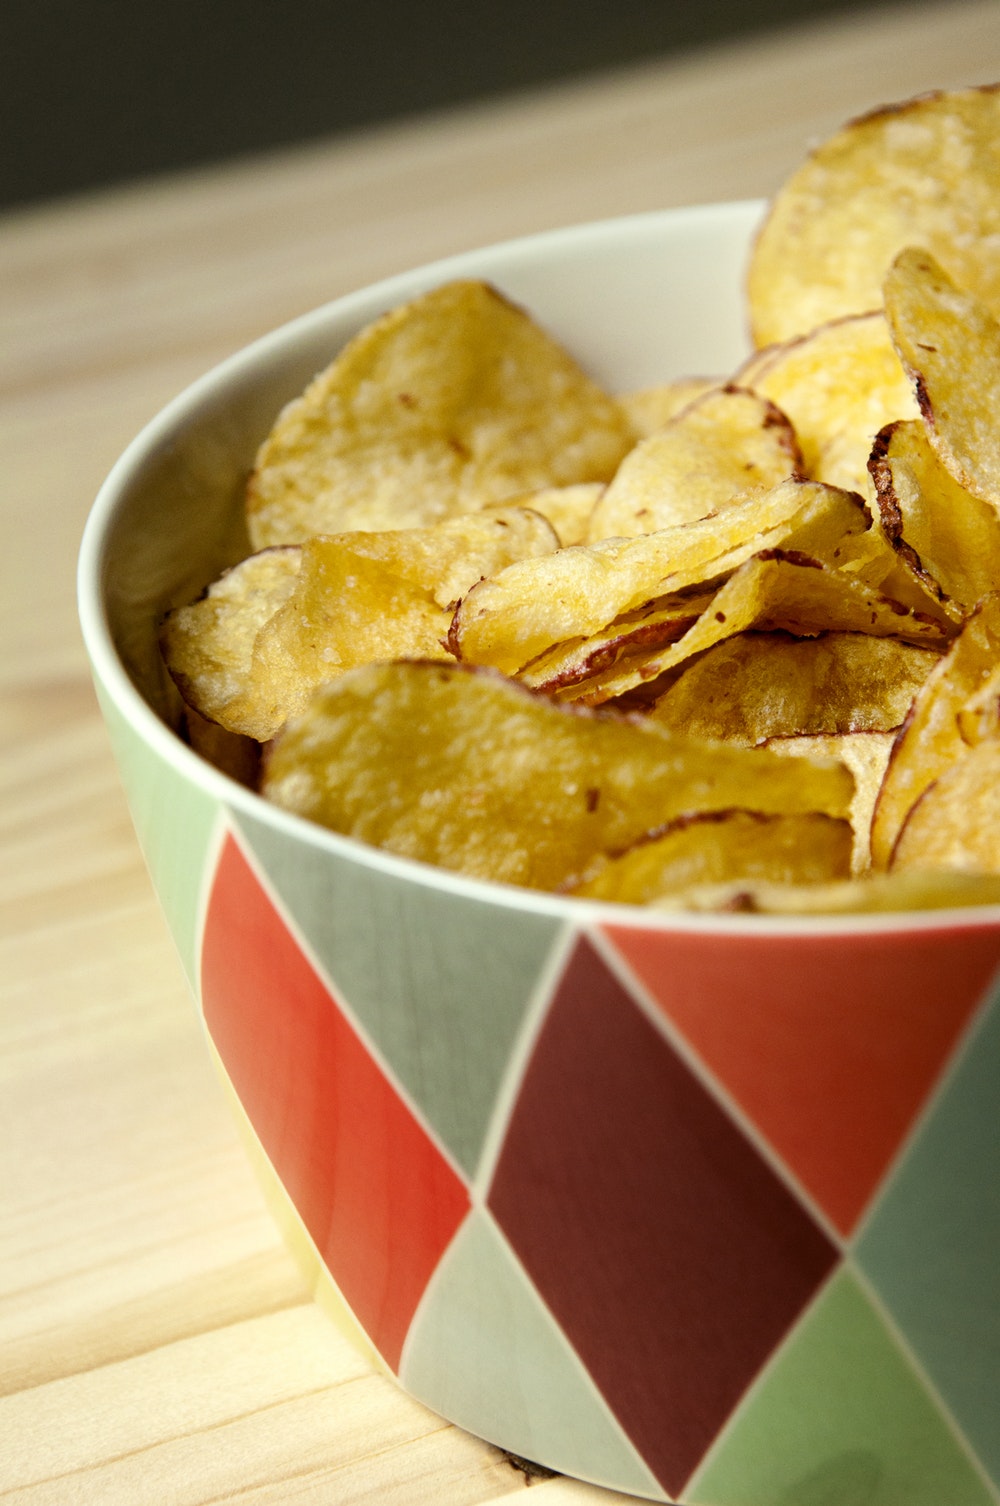 Chips Pictures Image